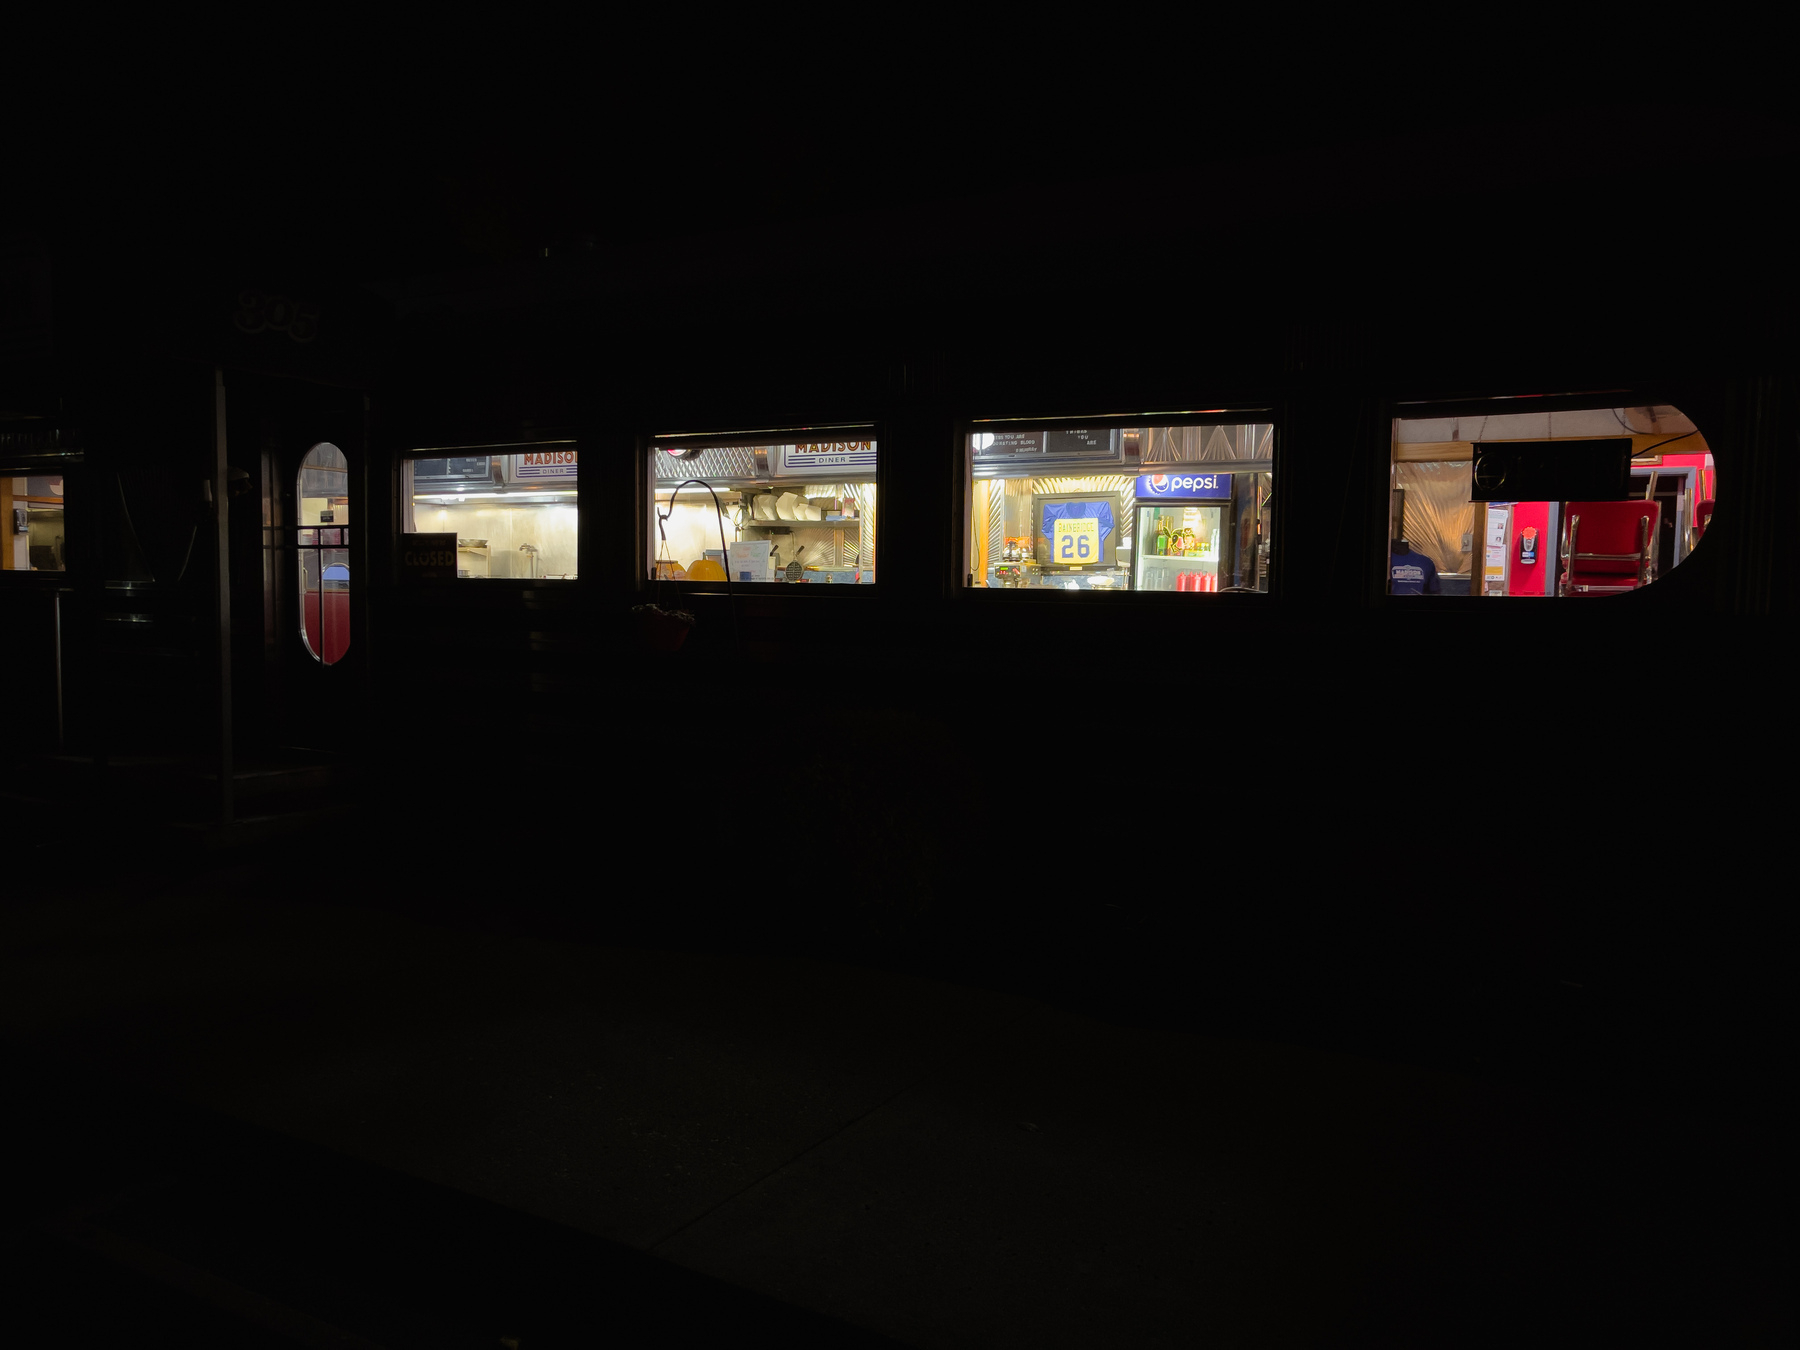 Windows of diner lit from within at night.